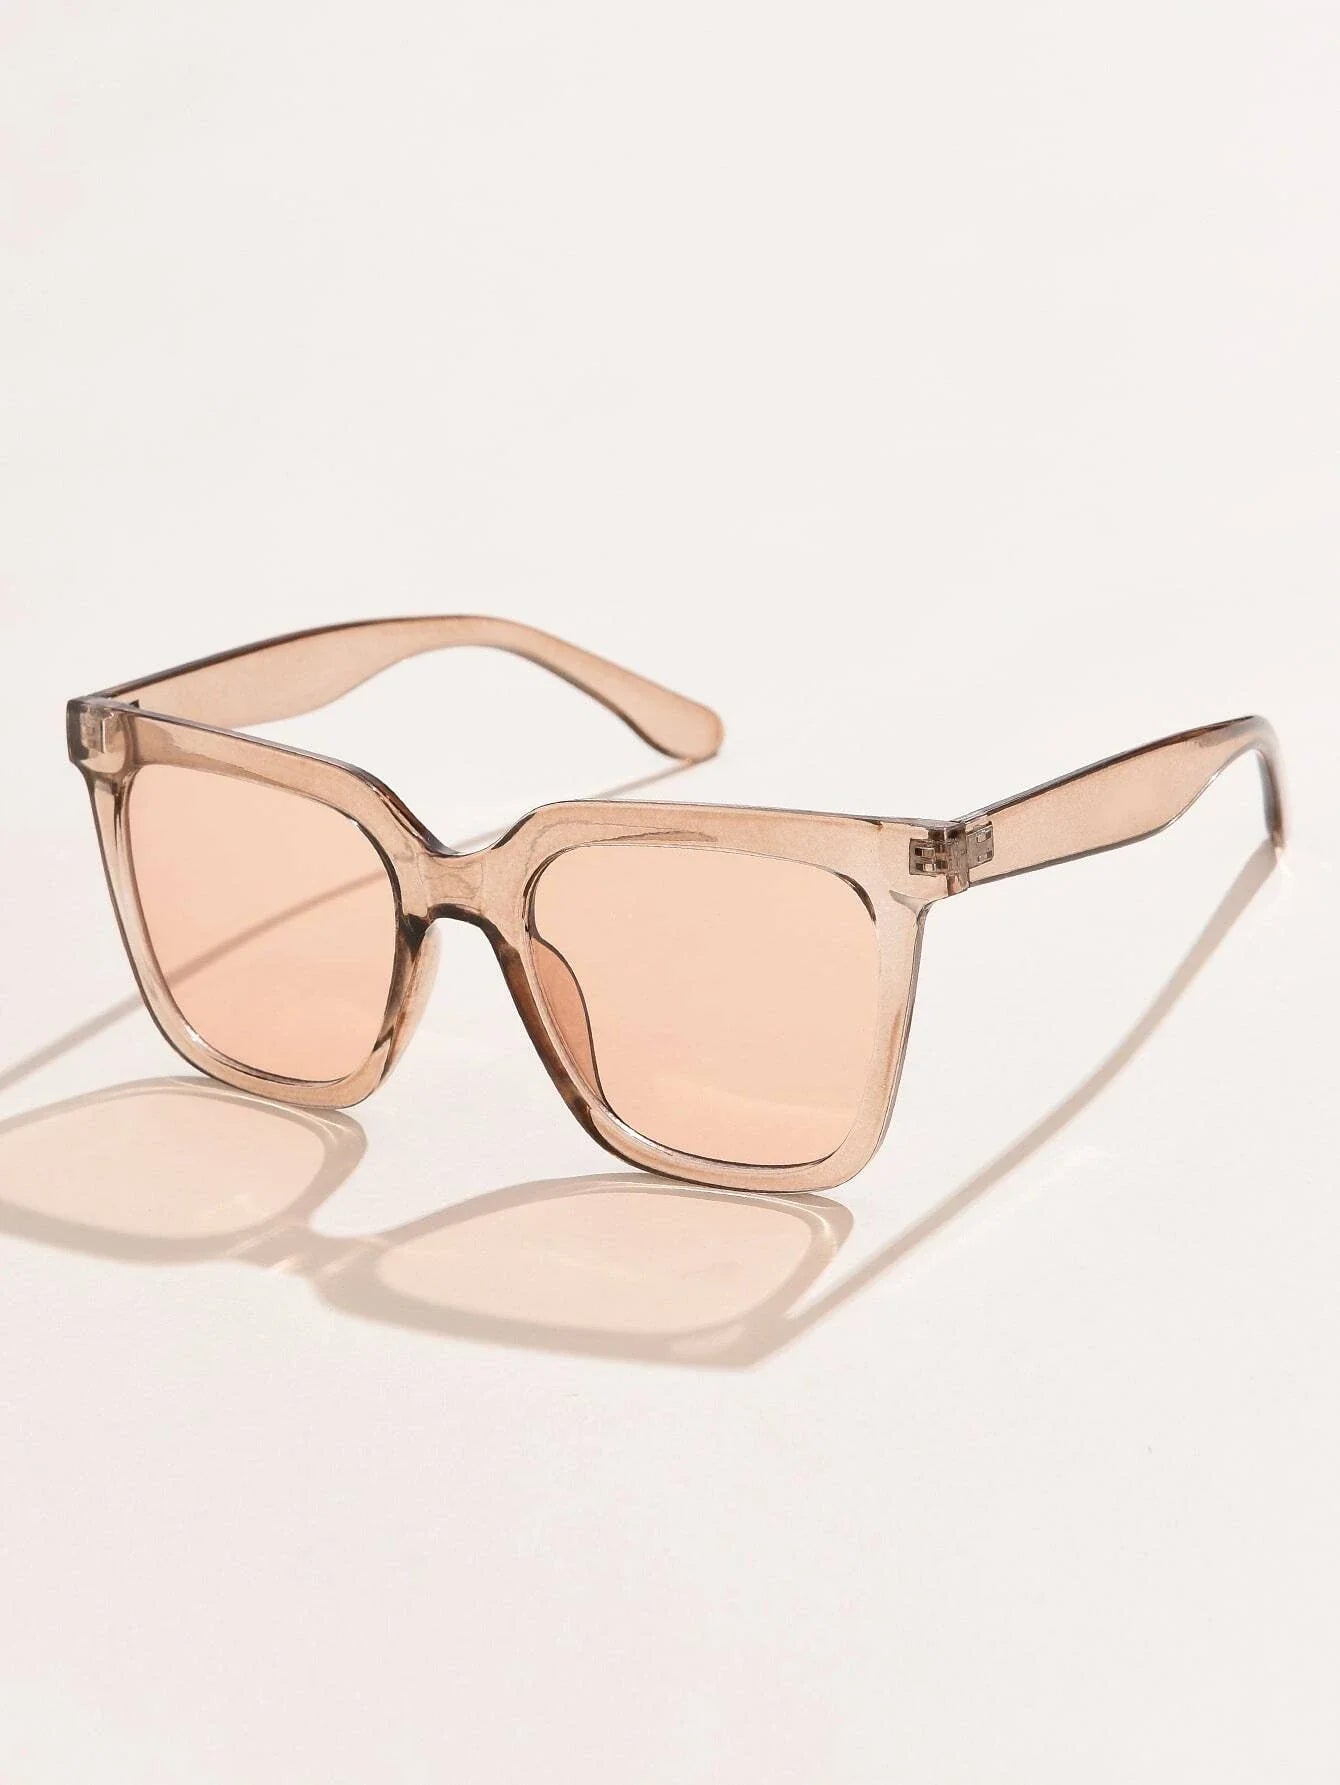 Buy Shein Tinted Lens Fashion Glasses in Pakistan